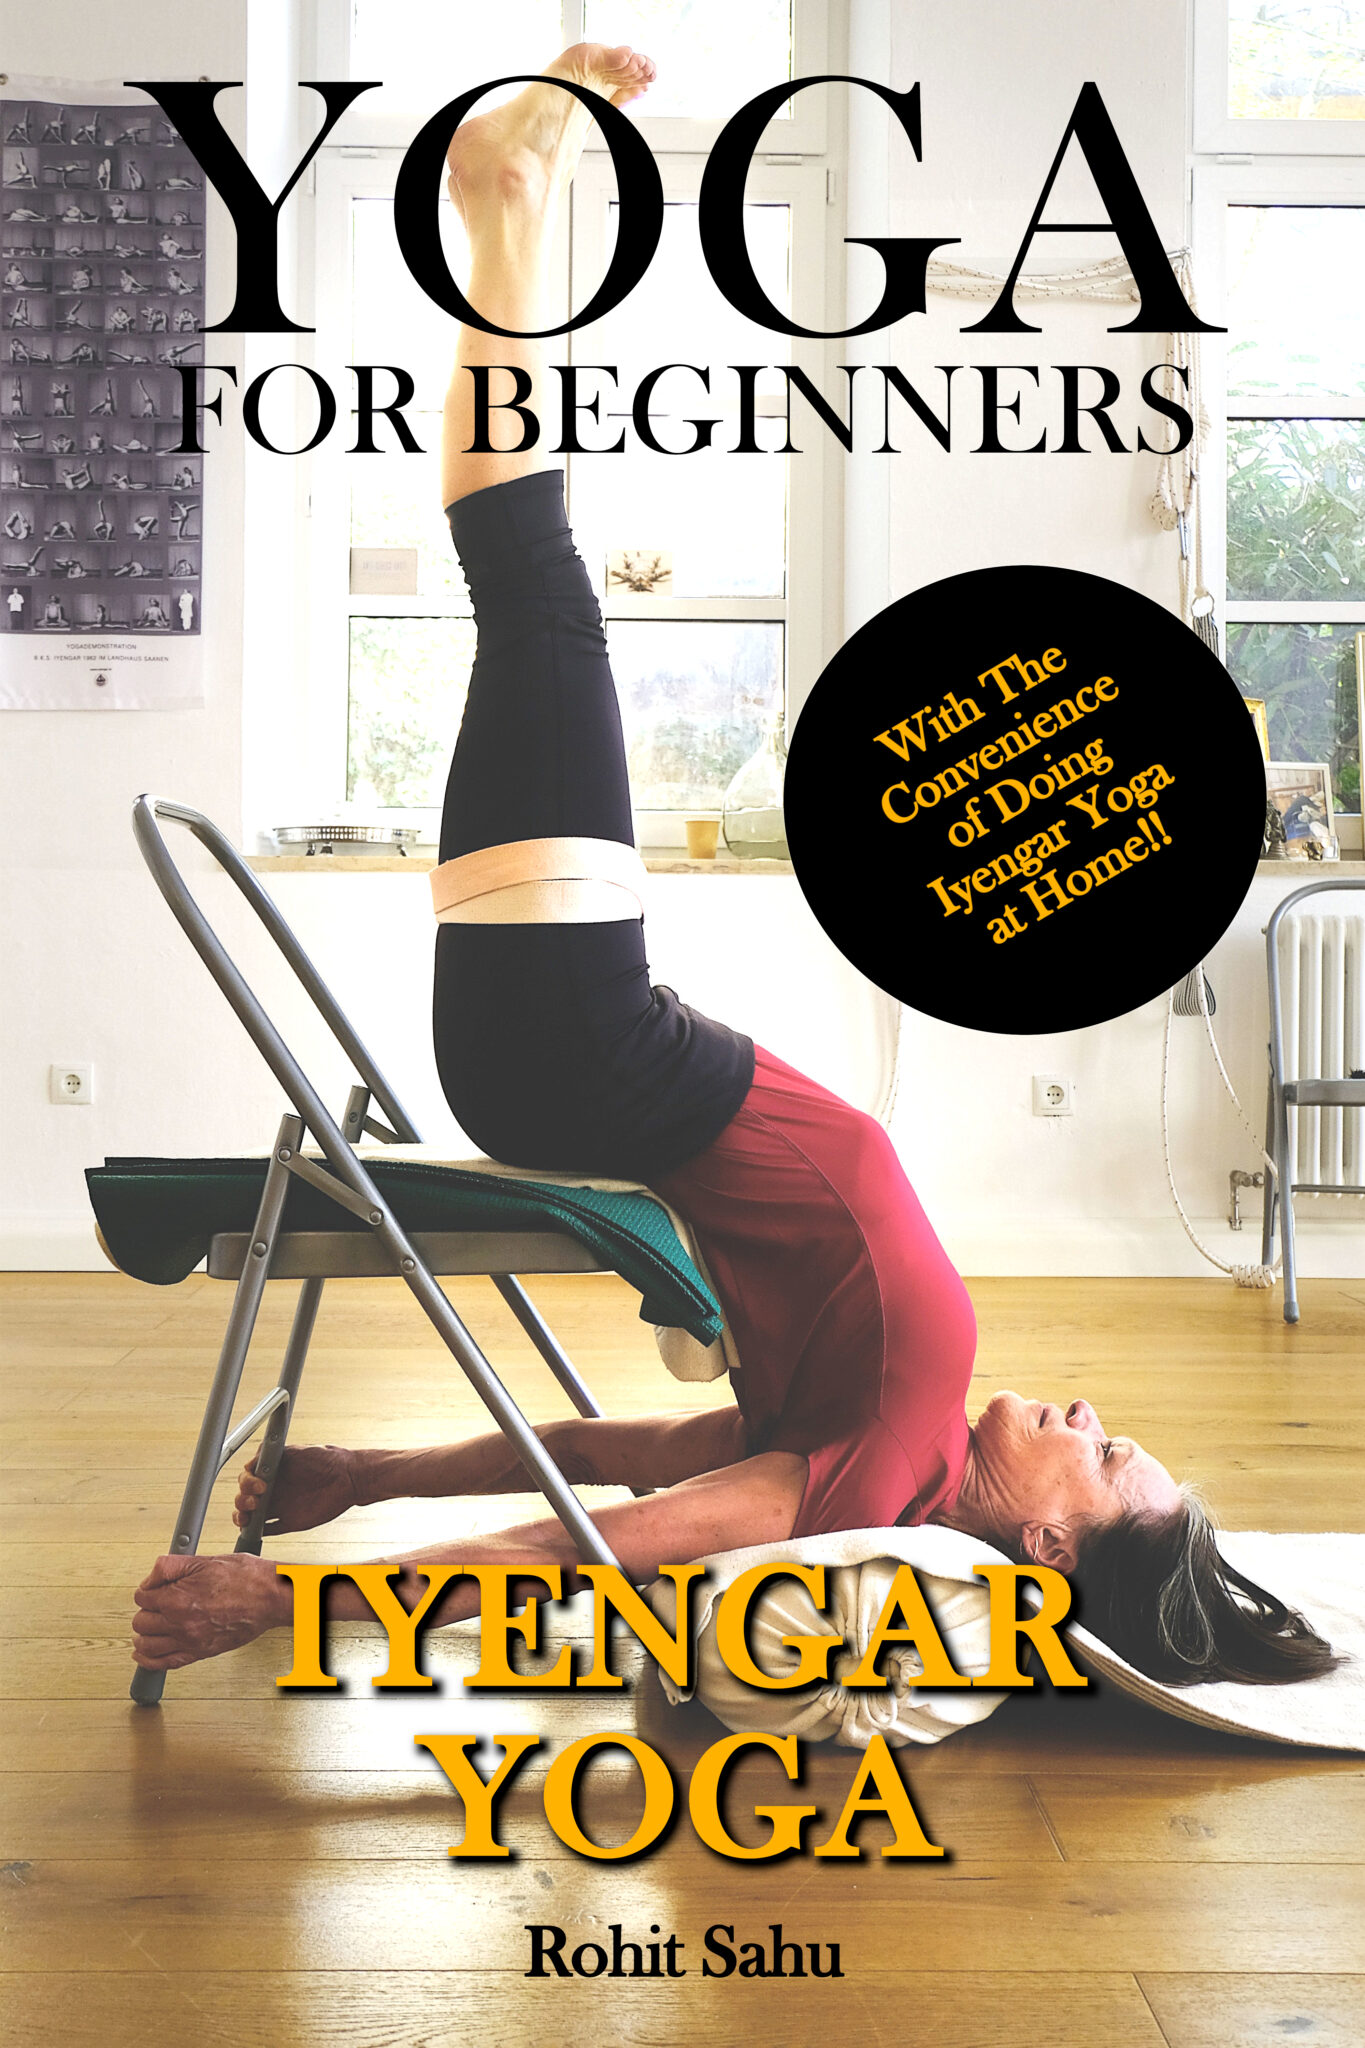 Yoga For Beginners: Iyengar Yoga: The Complete Guide to Master Iyengar Yoga; Benefits, Essentials, Asanas (with Pictures), Pranayamas, Meditation, Safety Tips, Common Mistakes, FAQs, and Common Myths